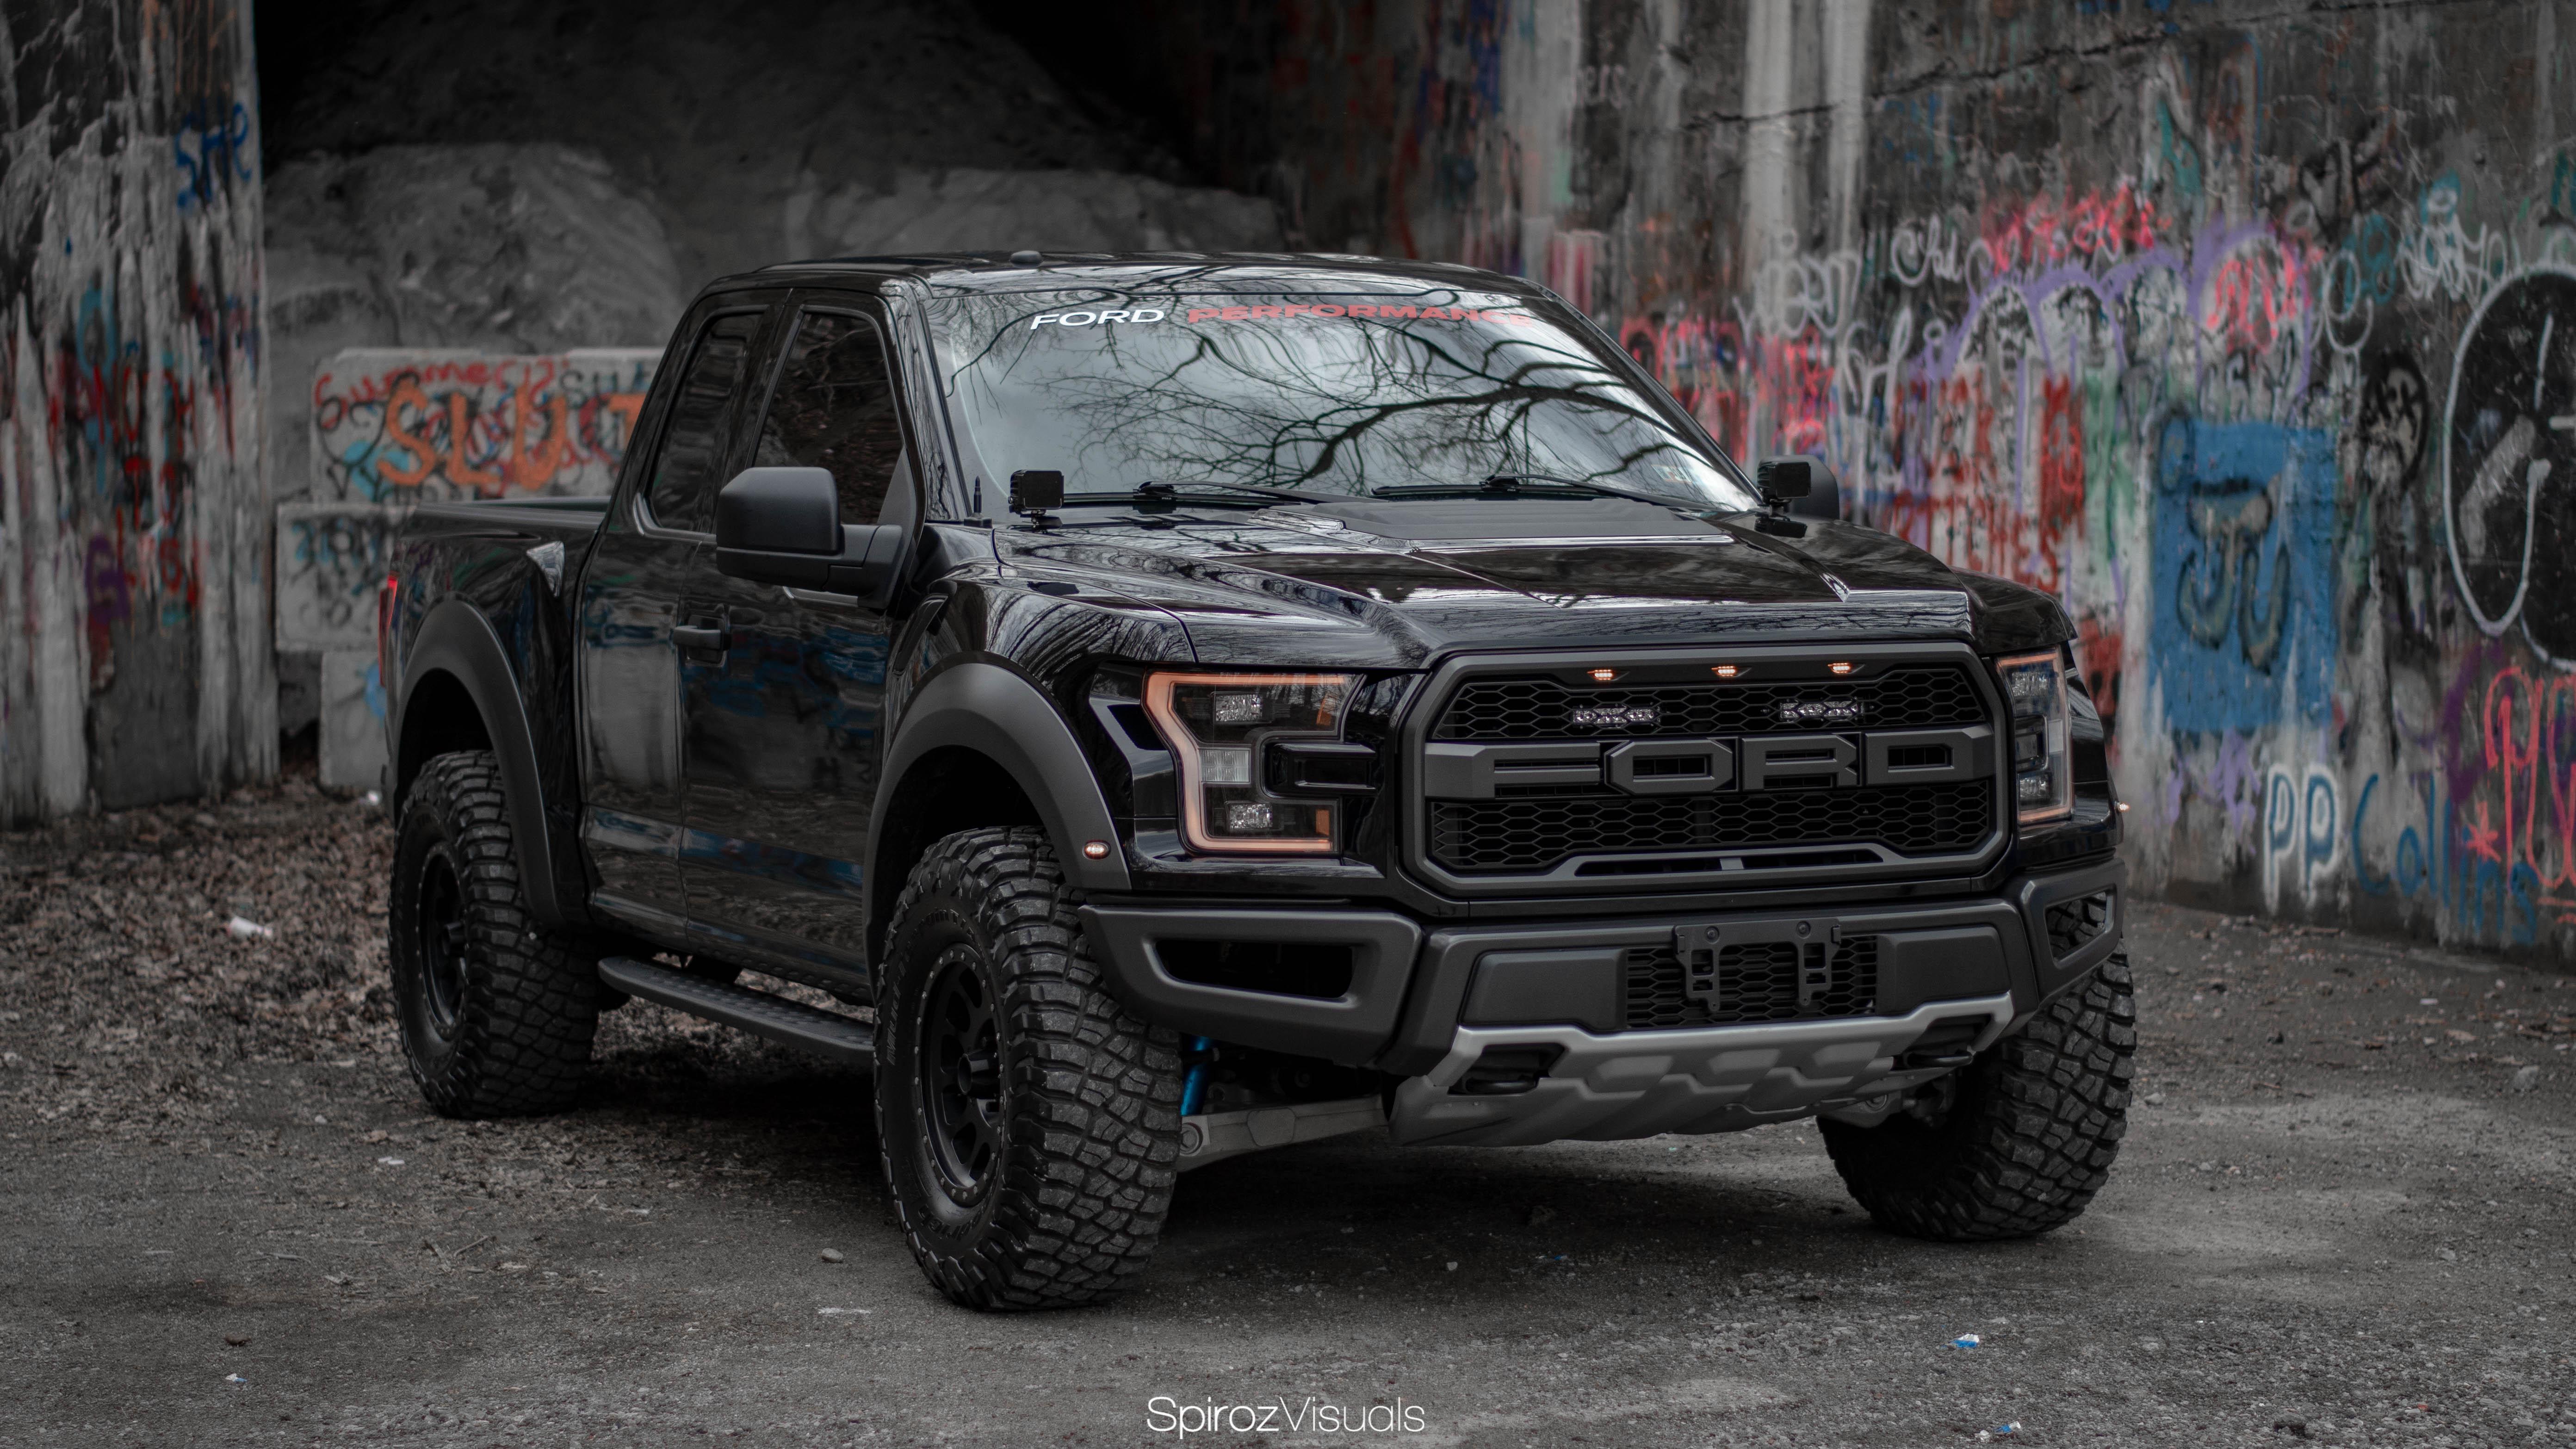 Ford Raptor is Ready for Battle (4k)